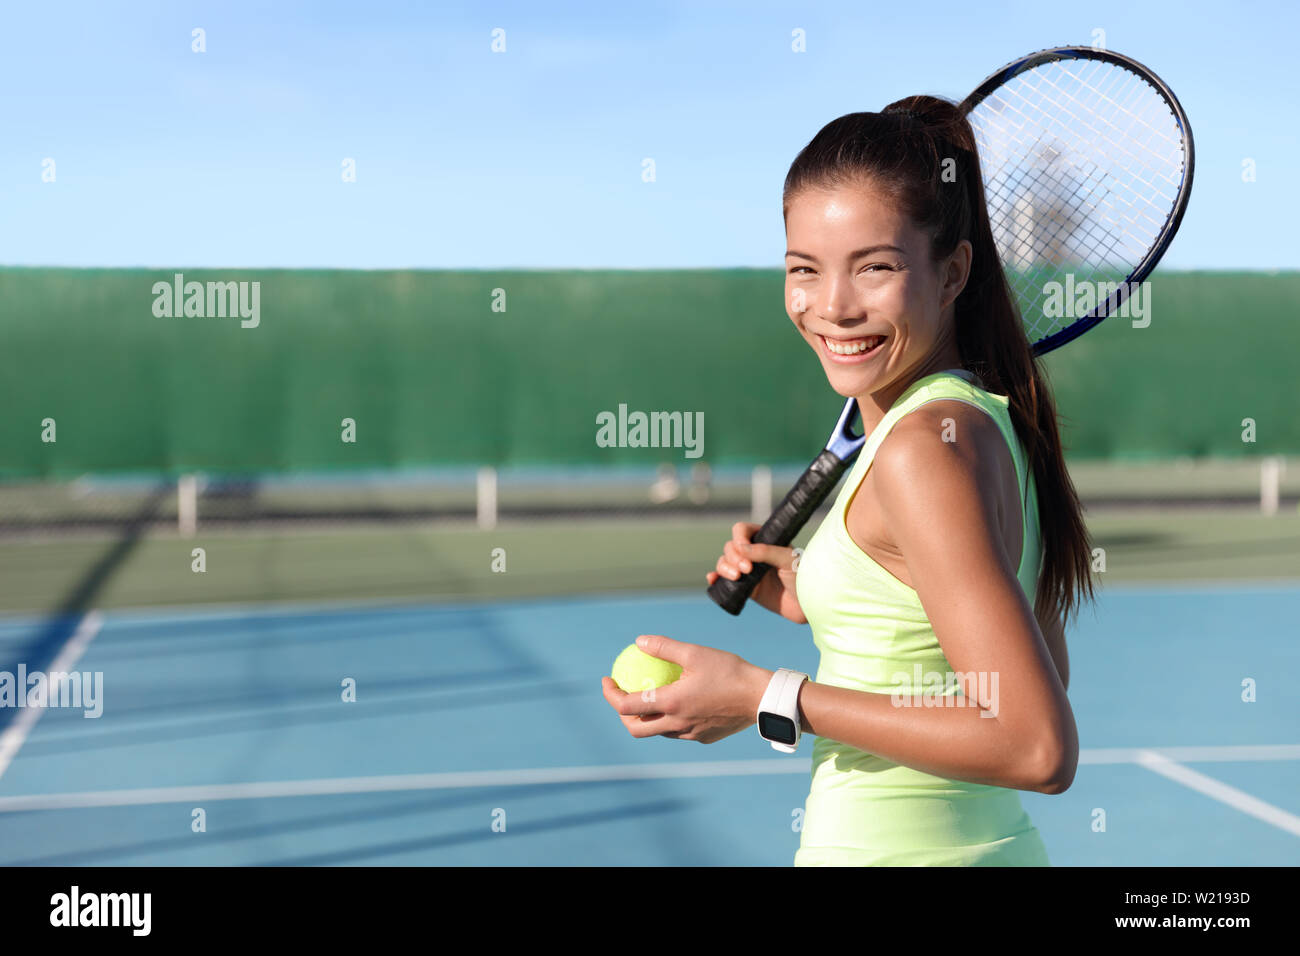 Asian young tennis player woman on outdoor hard court holding ball and racket portrait. Female athlete wearing yellow sportswear and activity tracker smartwatch. wearable tech fitness watch. Stock Photo